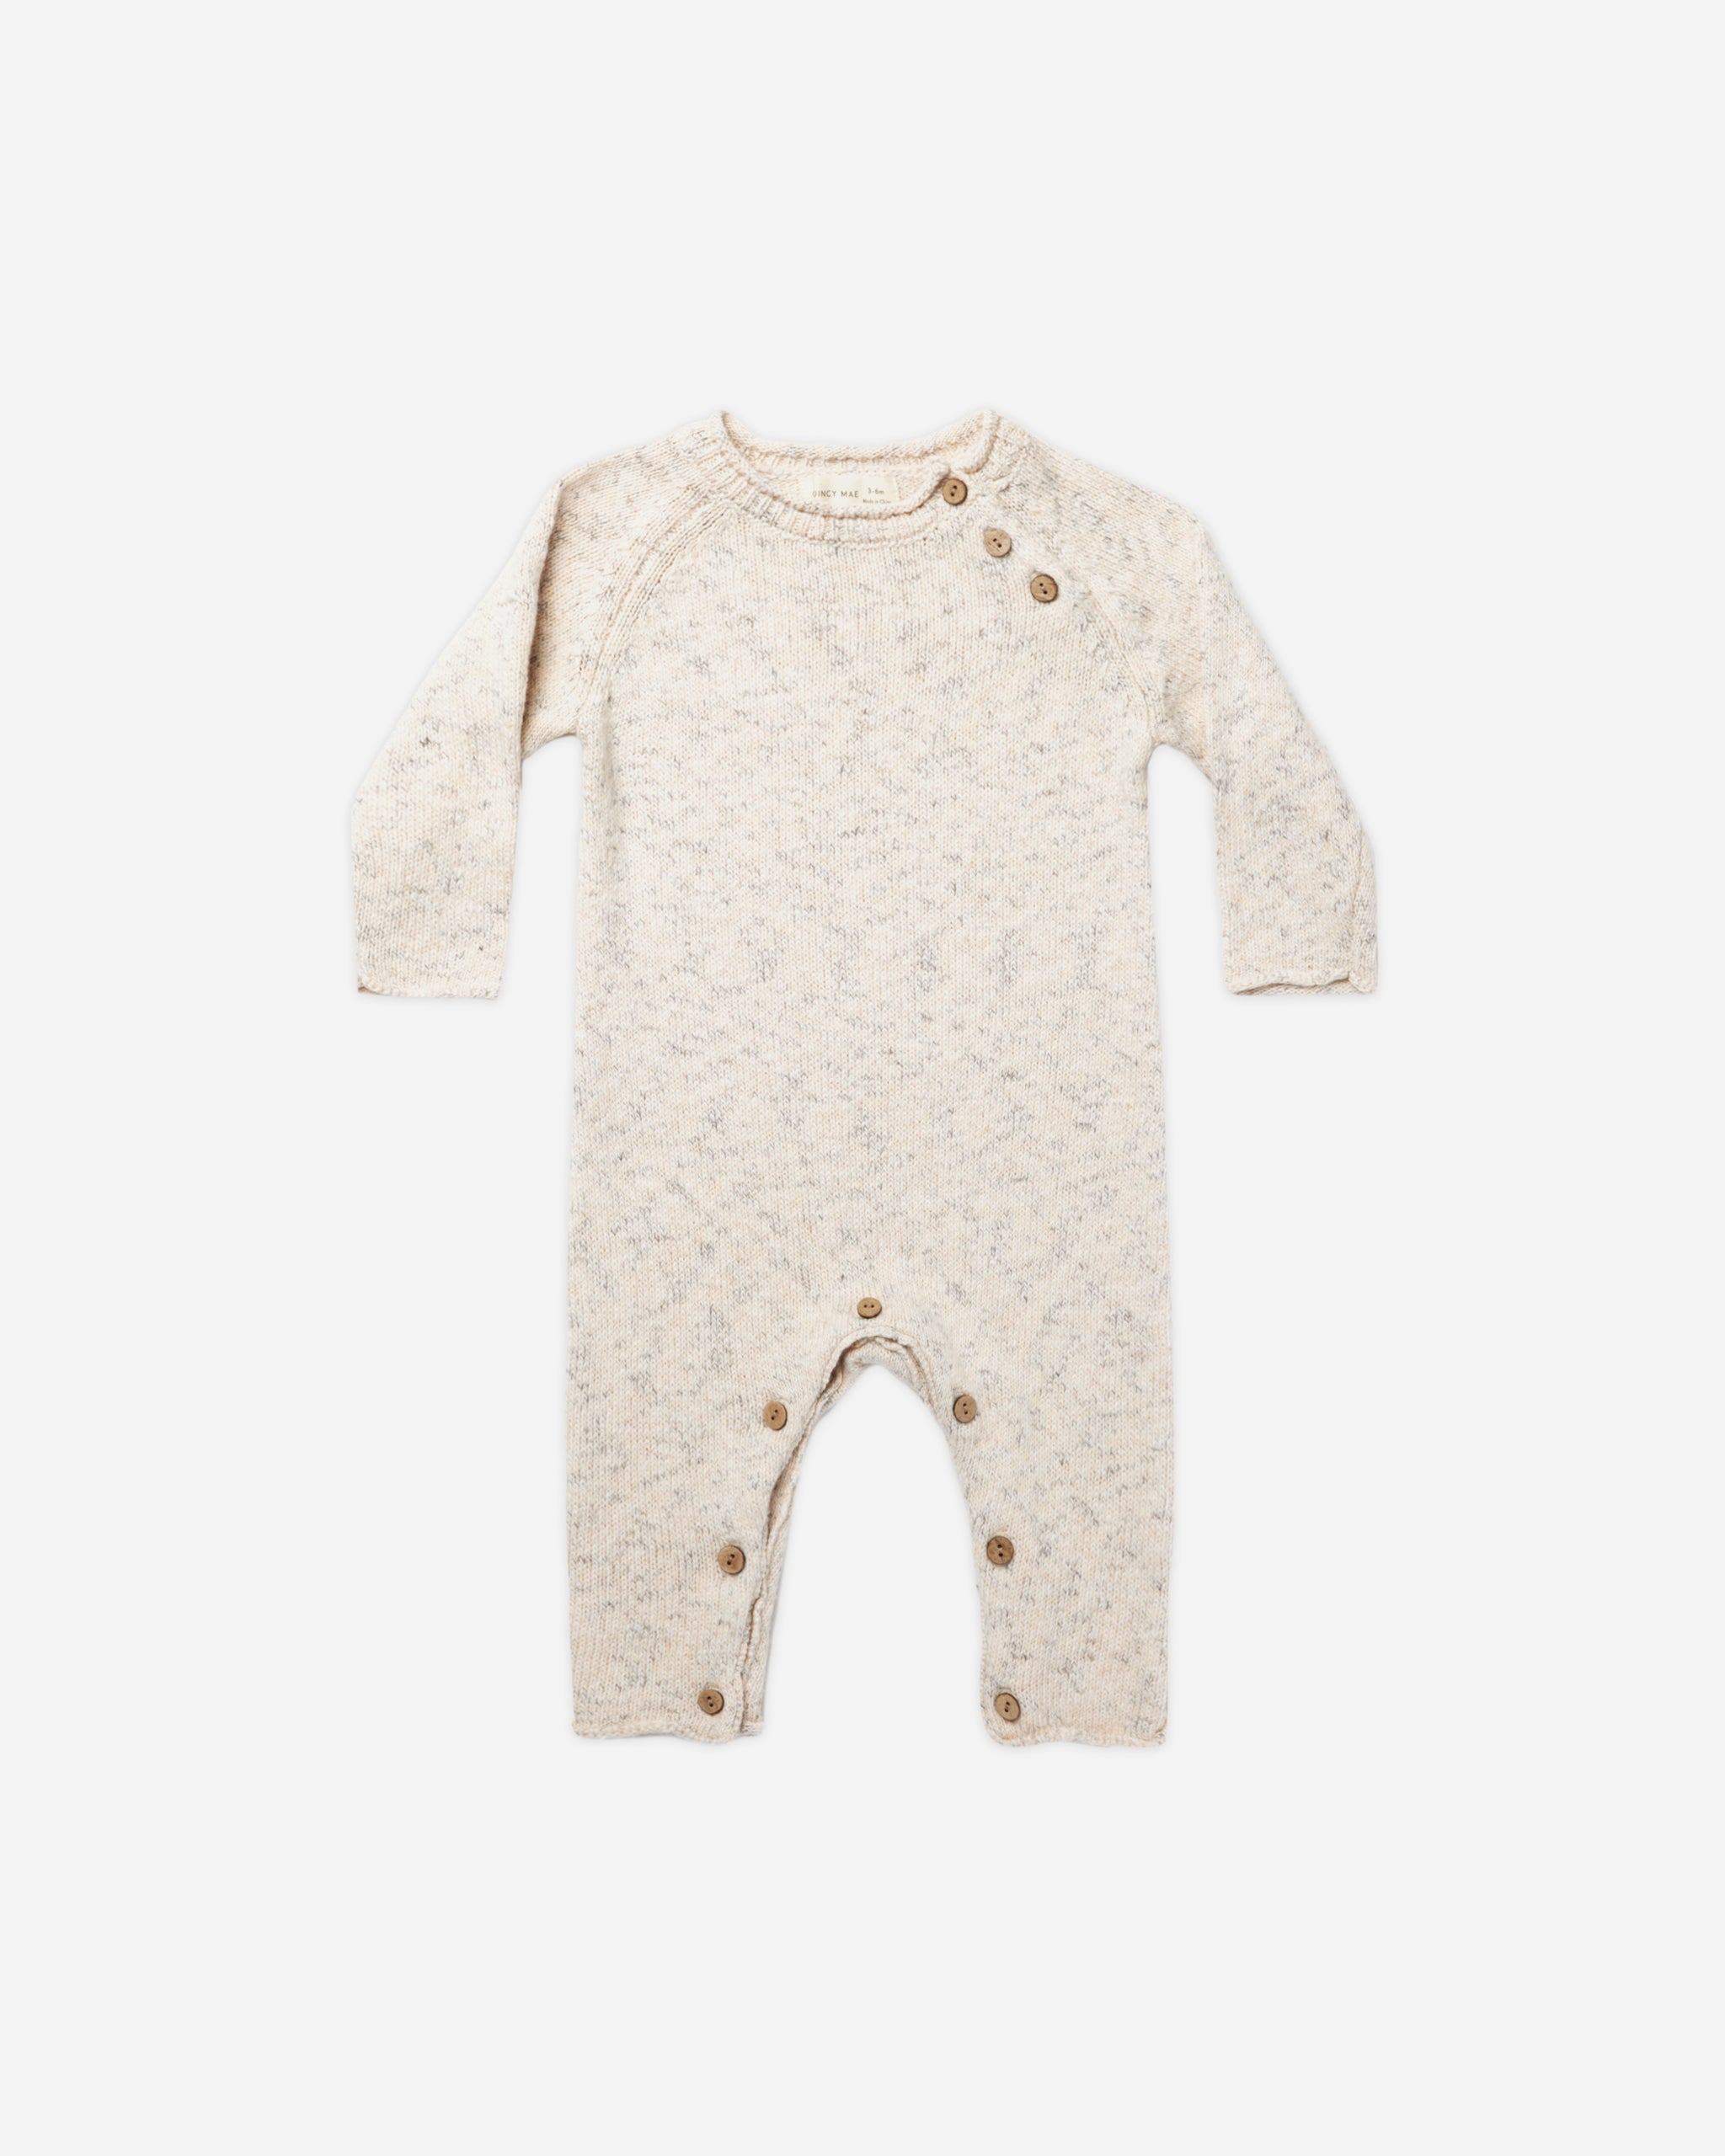 Speckled Knit Jumpsuit || Natural - Rylee + Cru | Kids Clothes | Trendy Baby Clothes | Modern Infant Outfits |